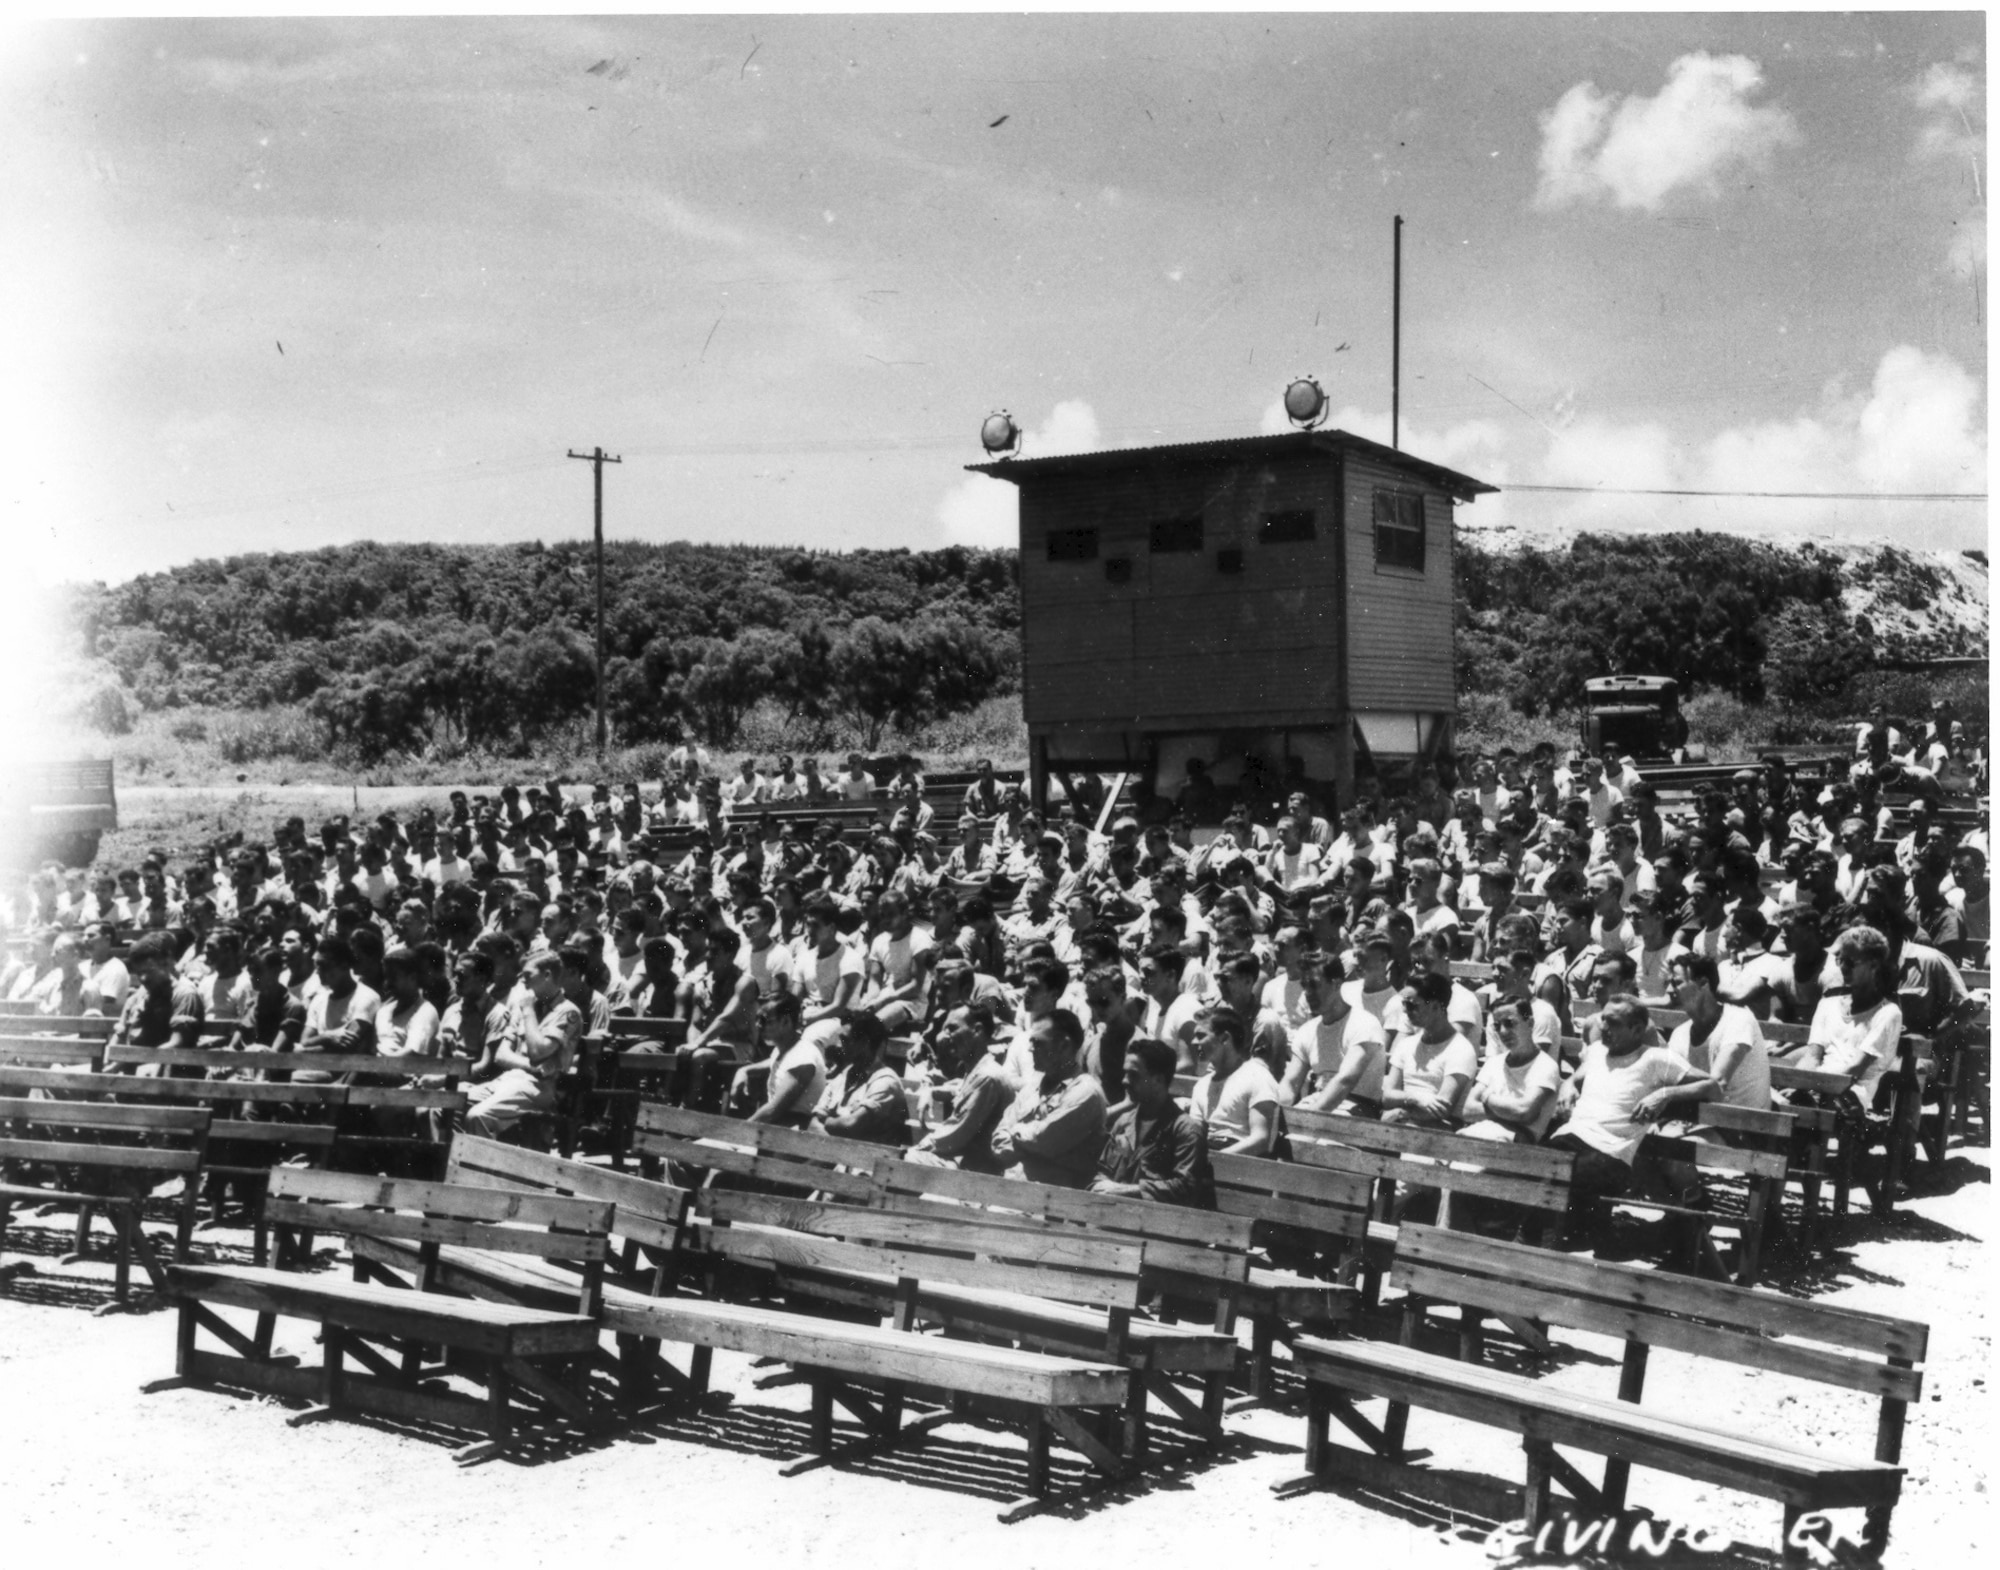 Members of the 509th Composite Group gather for a chaplain-led service on Tinian, 1945, following the surrender of the Japanese Empire. (U.S. Army Air Forces file photo)